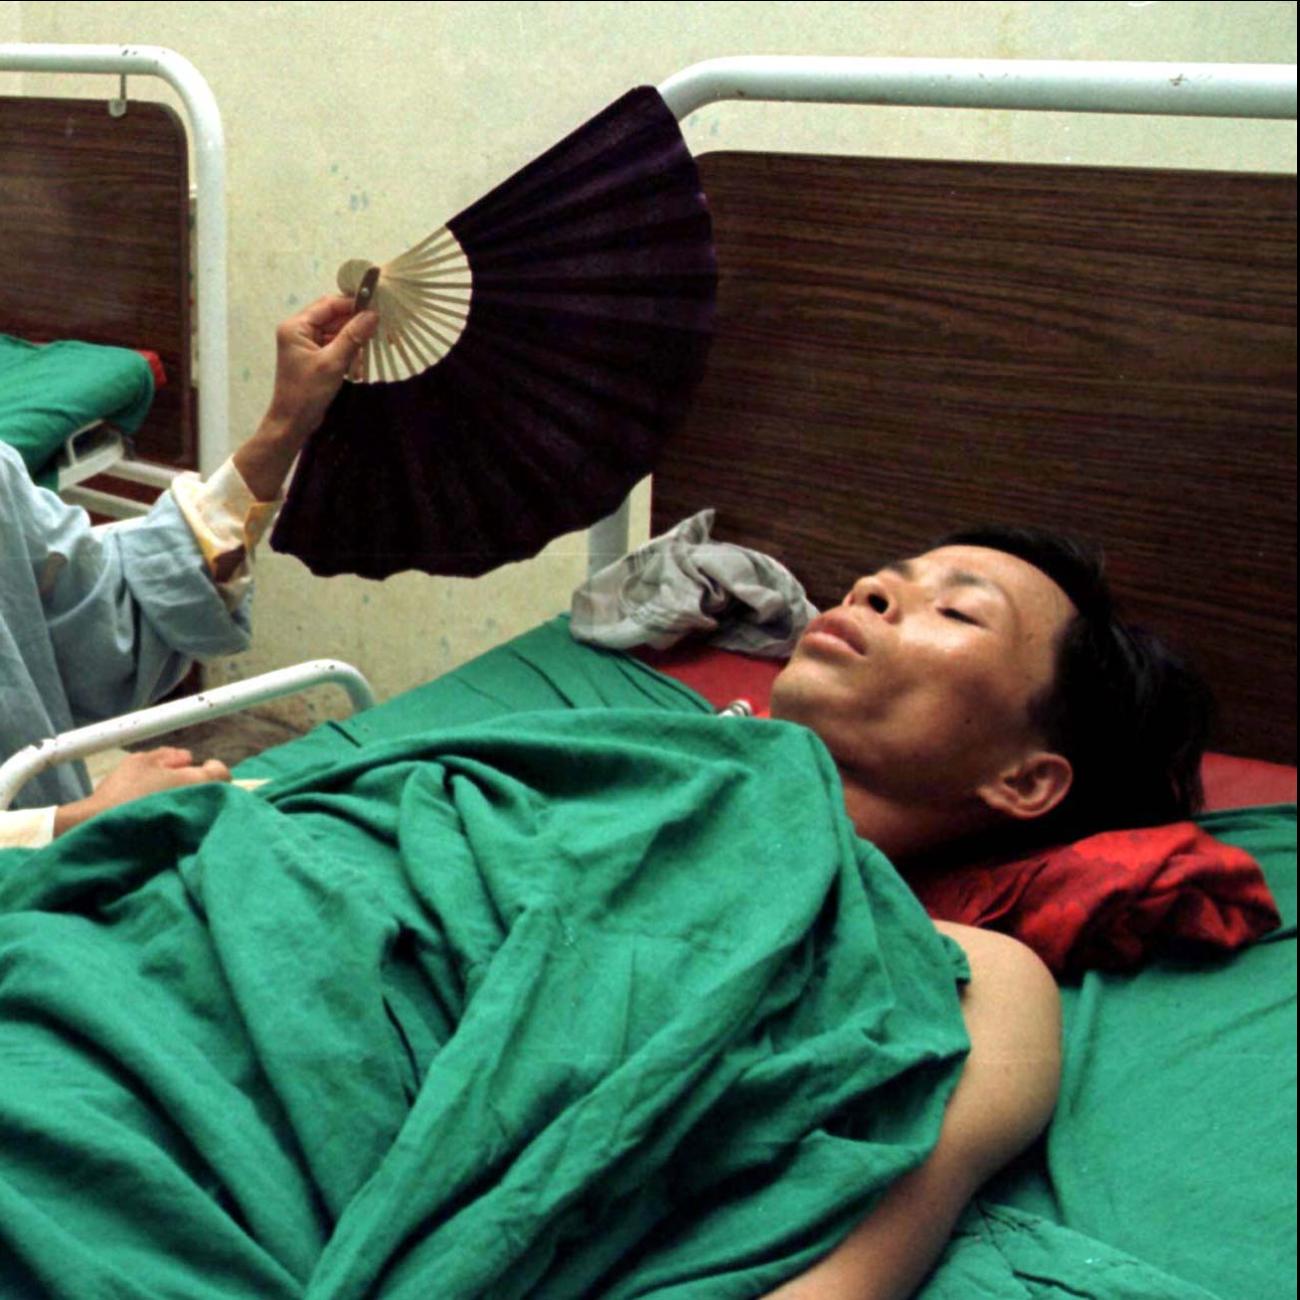 A man is fanned by his wife in the post-operative ward at Institute of Tuberculosis and Respiratory Diseases, after a lung operation for complications caused by tuberculosis, in Hanoi, Vietnam.